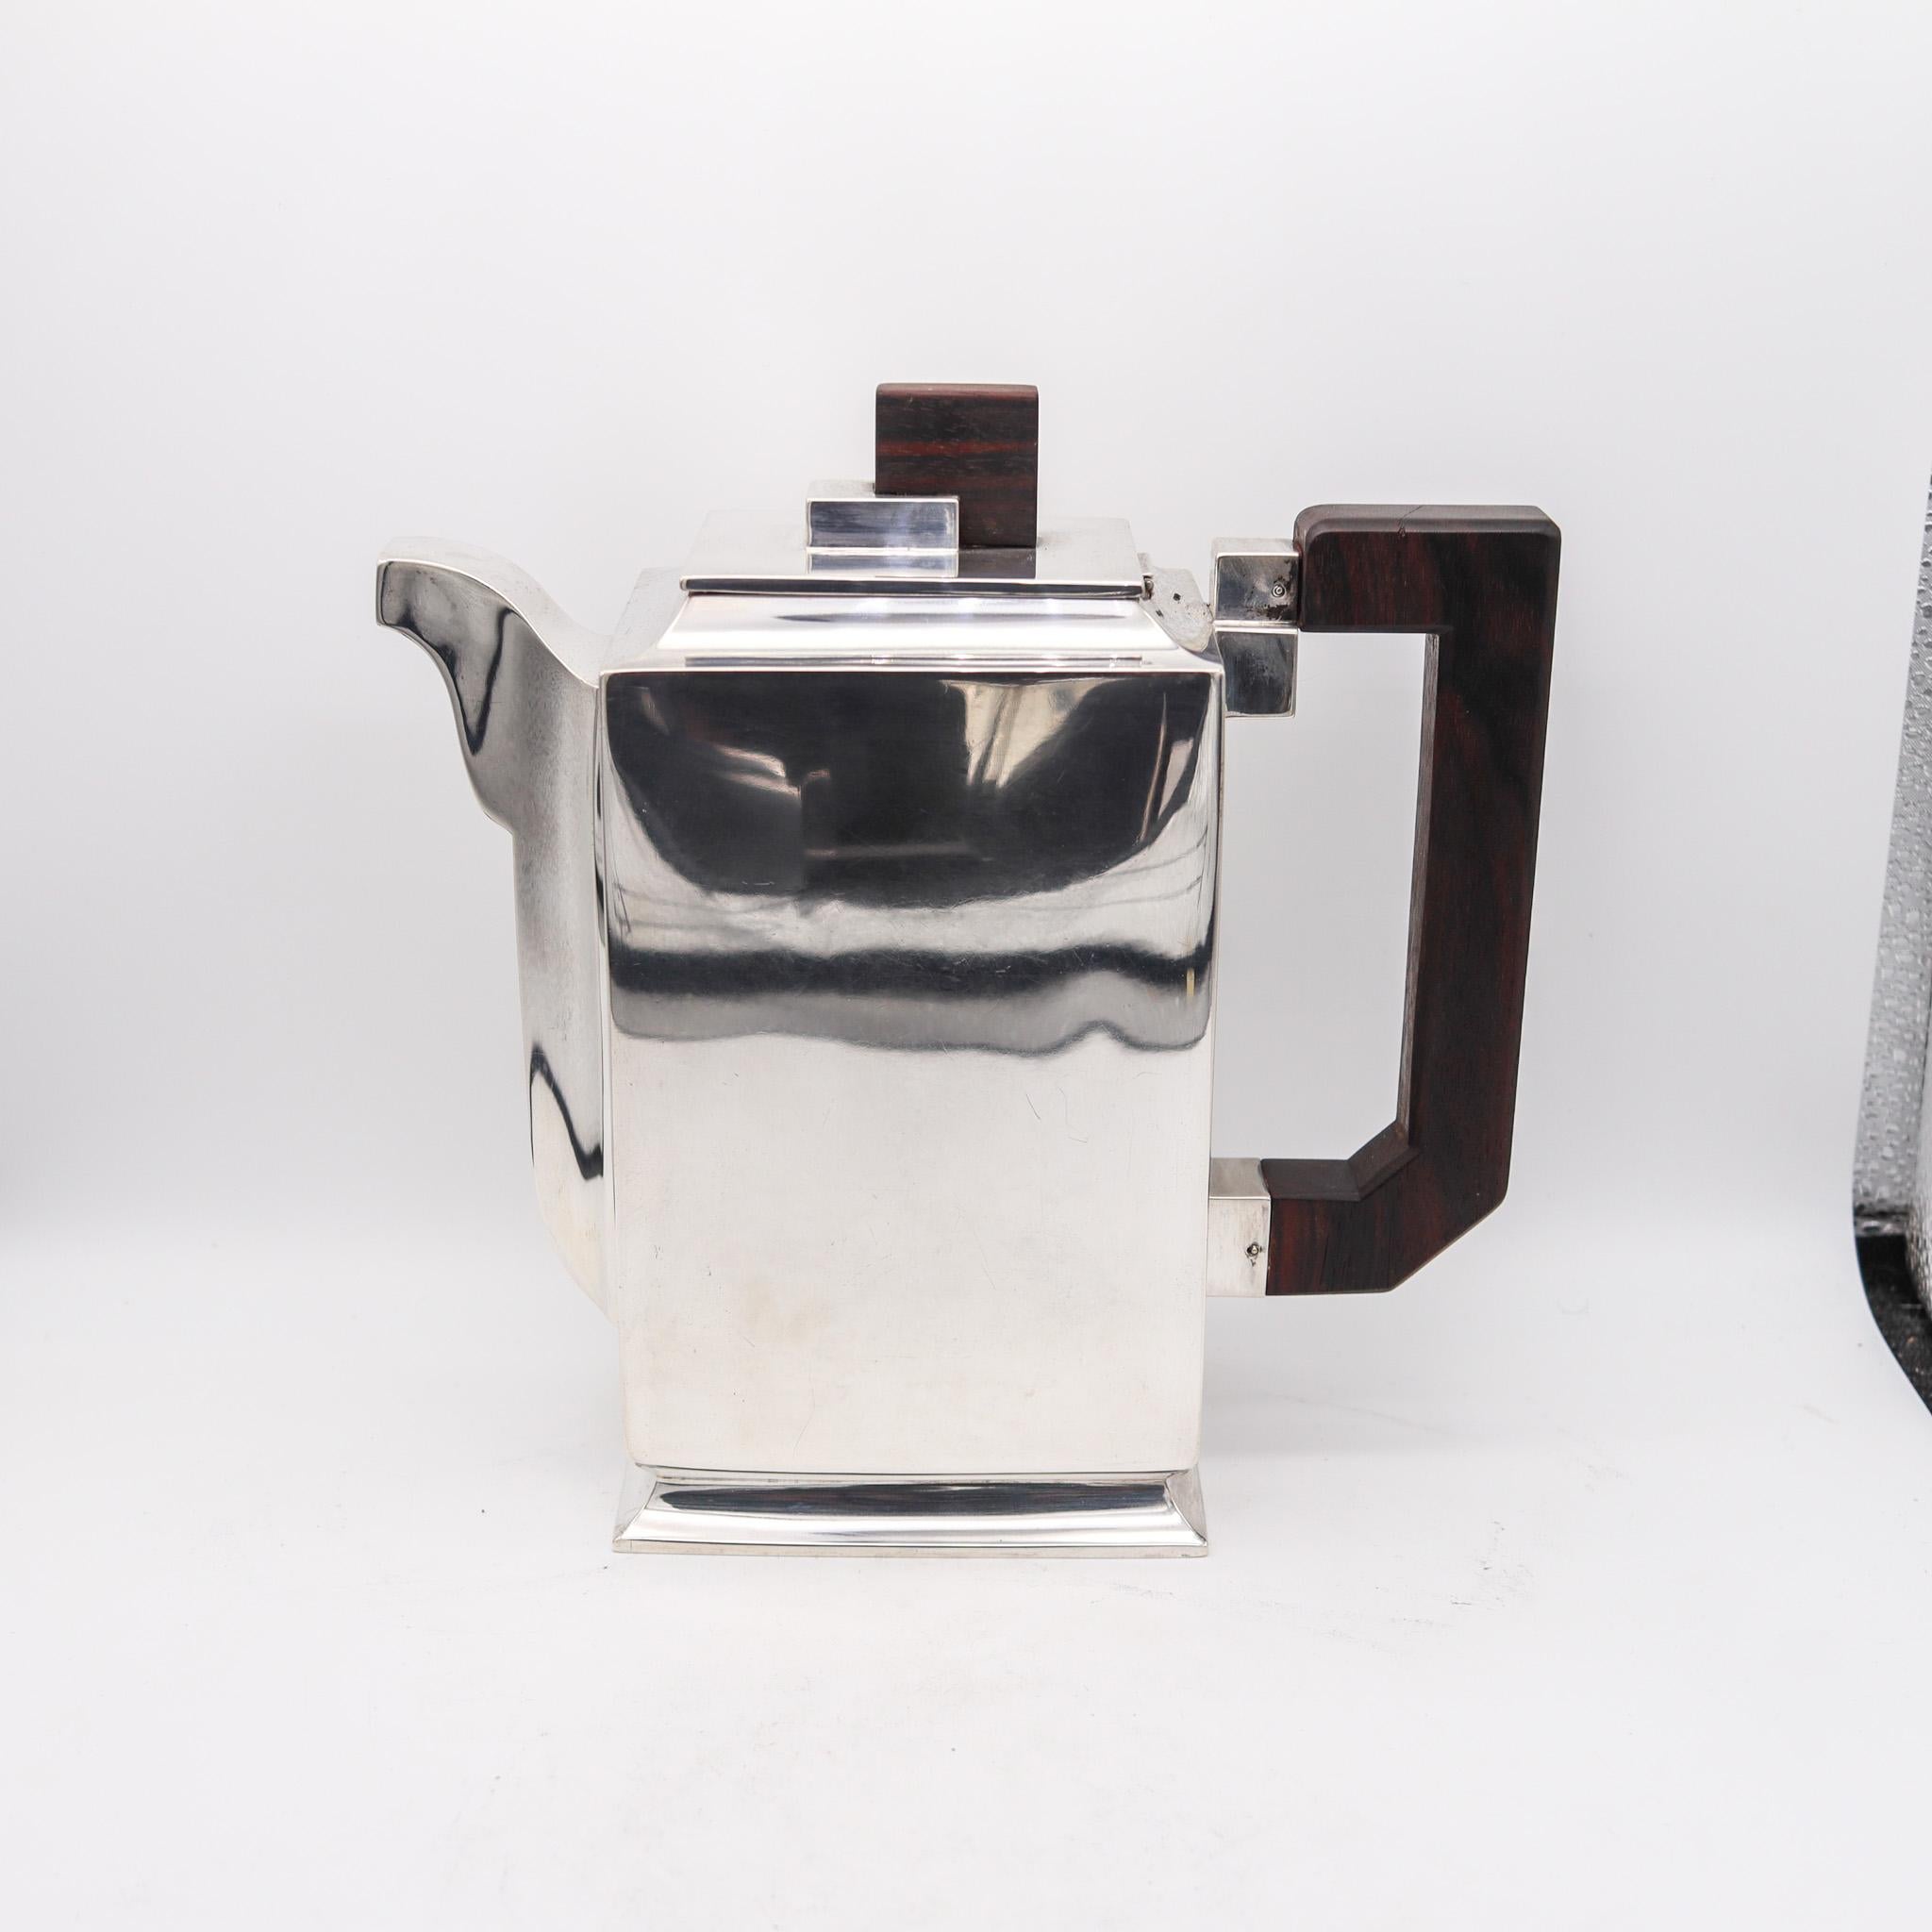 An art deco coffee set in silver and Ebony.

This rare model is of a very high quality execution, reflecting the full epitome of Art Deco spirit and the geometric art design of the time as use of rich materials like Macassar ebony and silver.